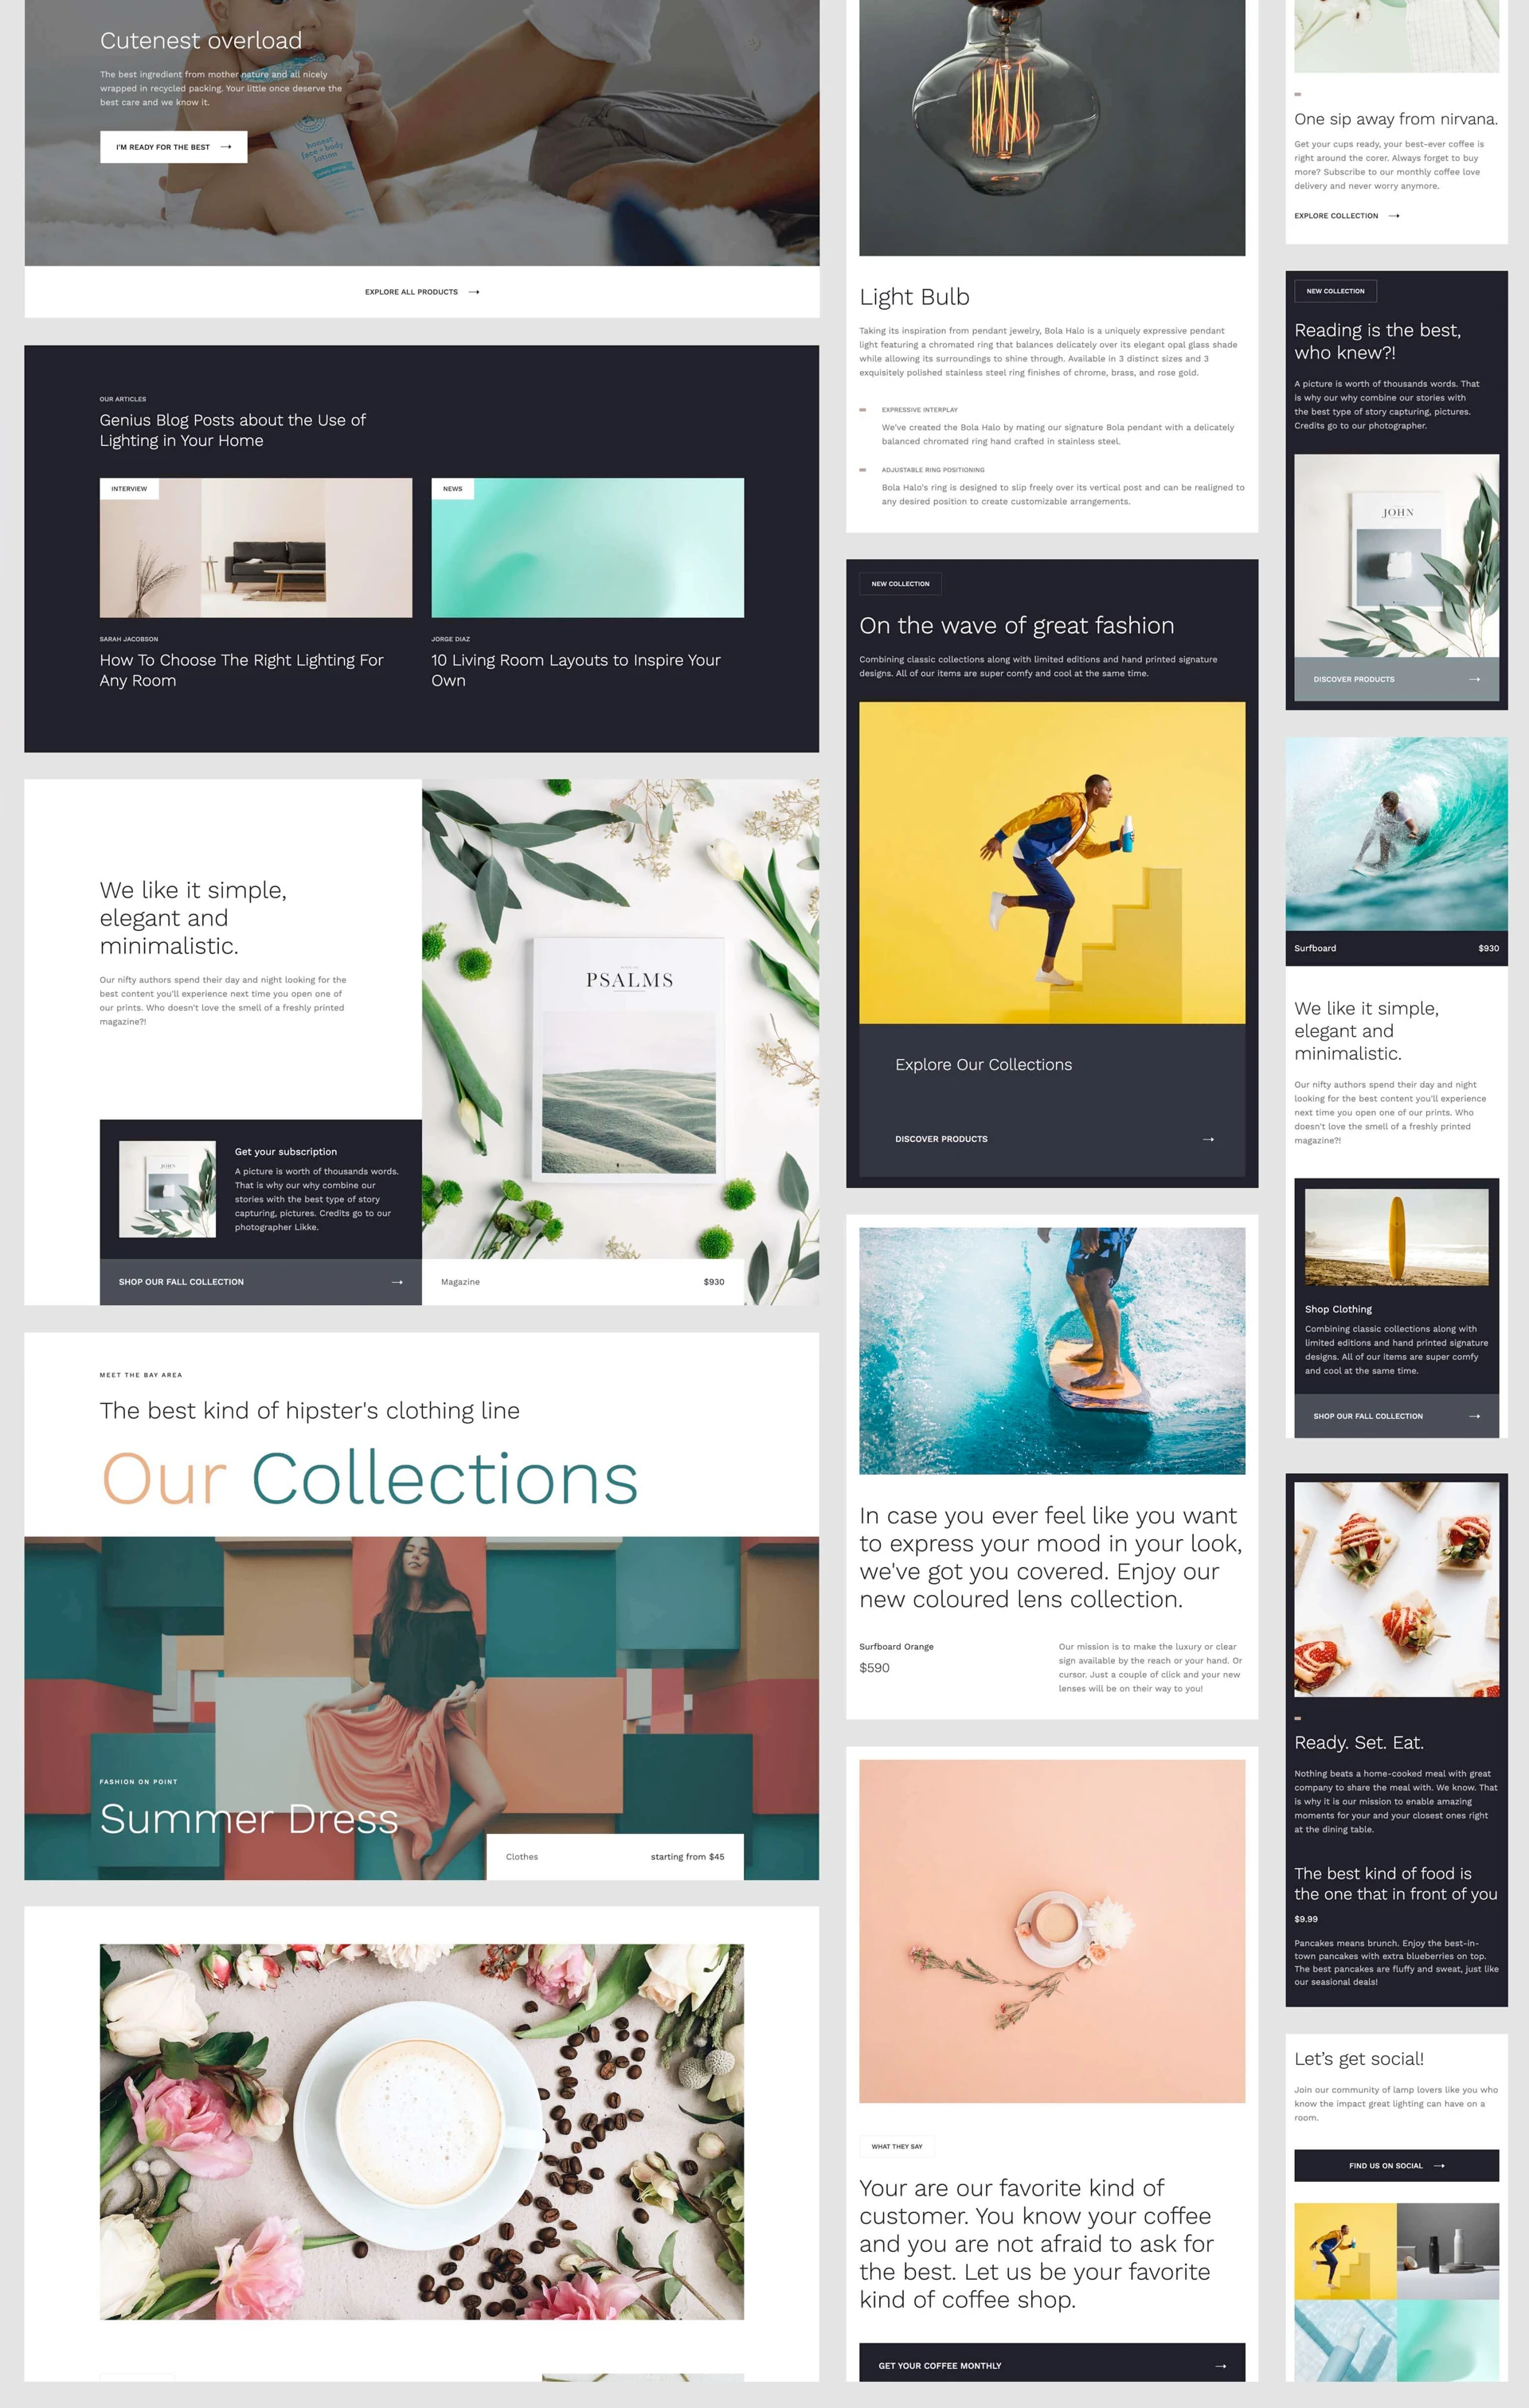 Prospero - Ecommerce UI Kit for Webflow - A clean, modular — and free — UI kit for ecommerce and beyond. Get all the pieces you need to create a polished online store in Webflow, including 2 unique, ready-to-launch templates. The kit includes 85 sections and 10 layouts showcasing large photos, sleek typography, and plenty of white space to keep the attention on your products and brand.